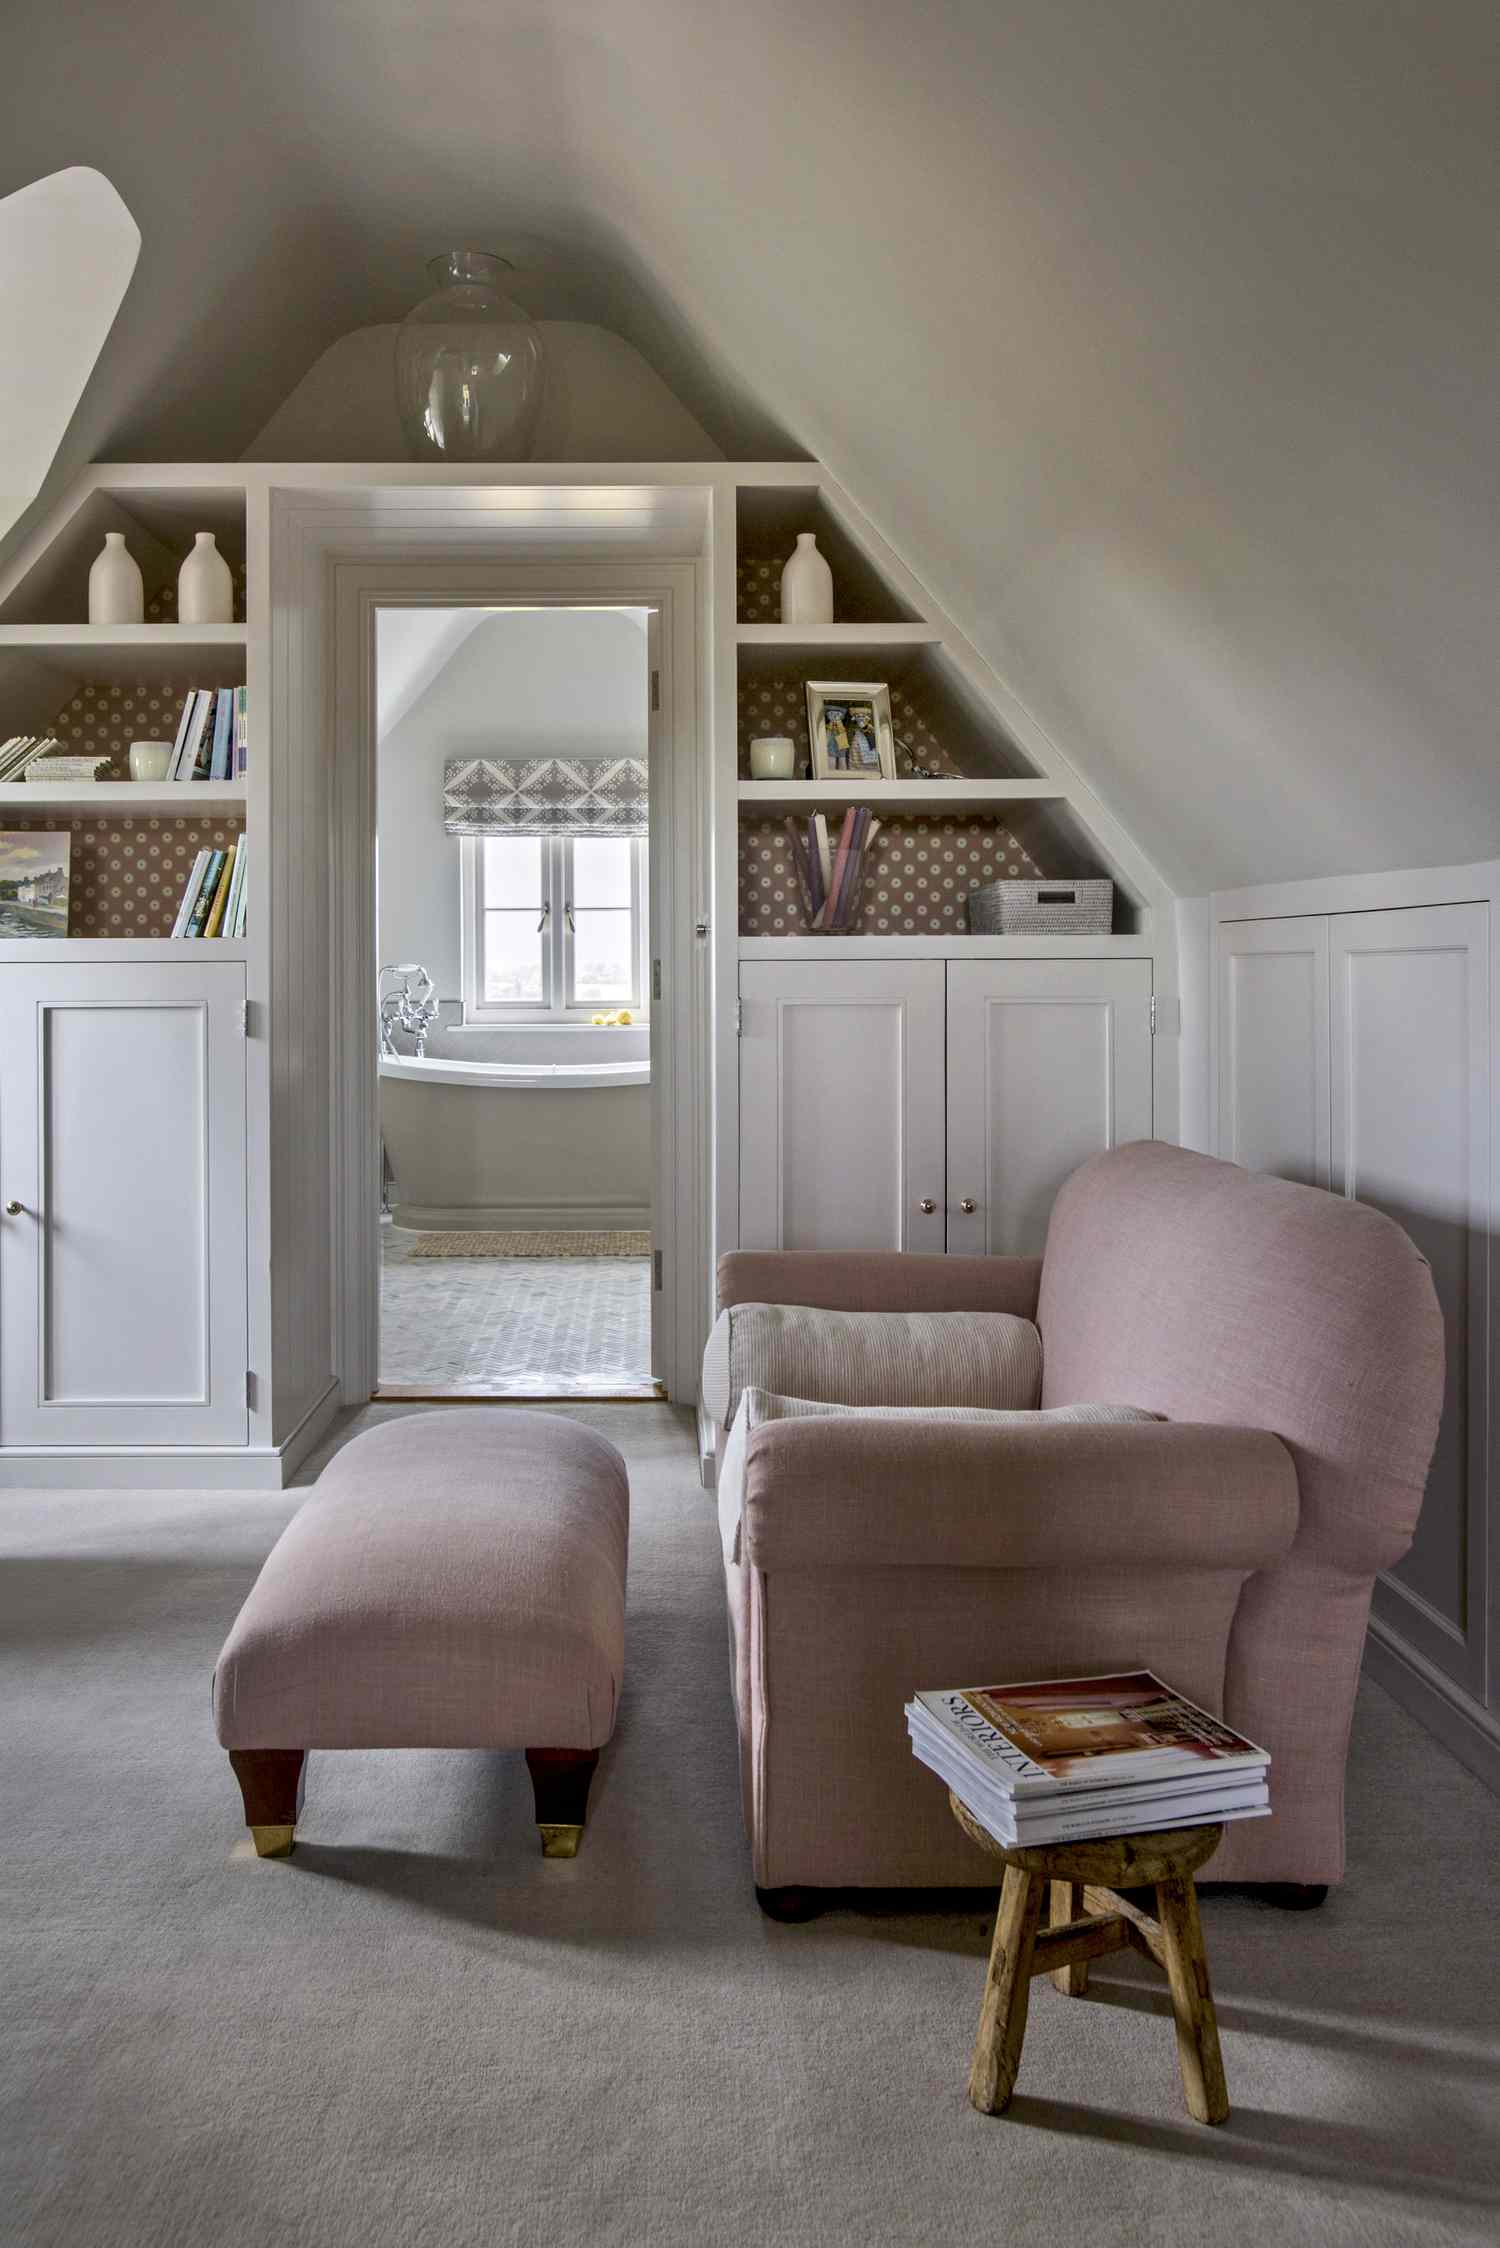 Faked built-ins in an alcove space by Sims-Hilditch designers